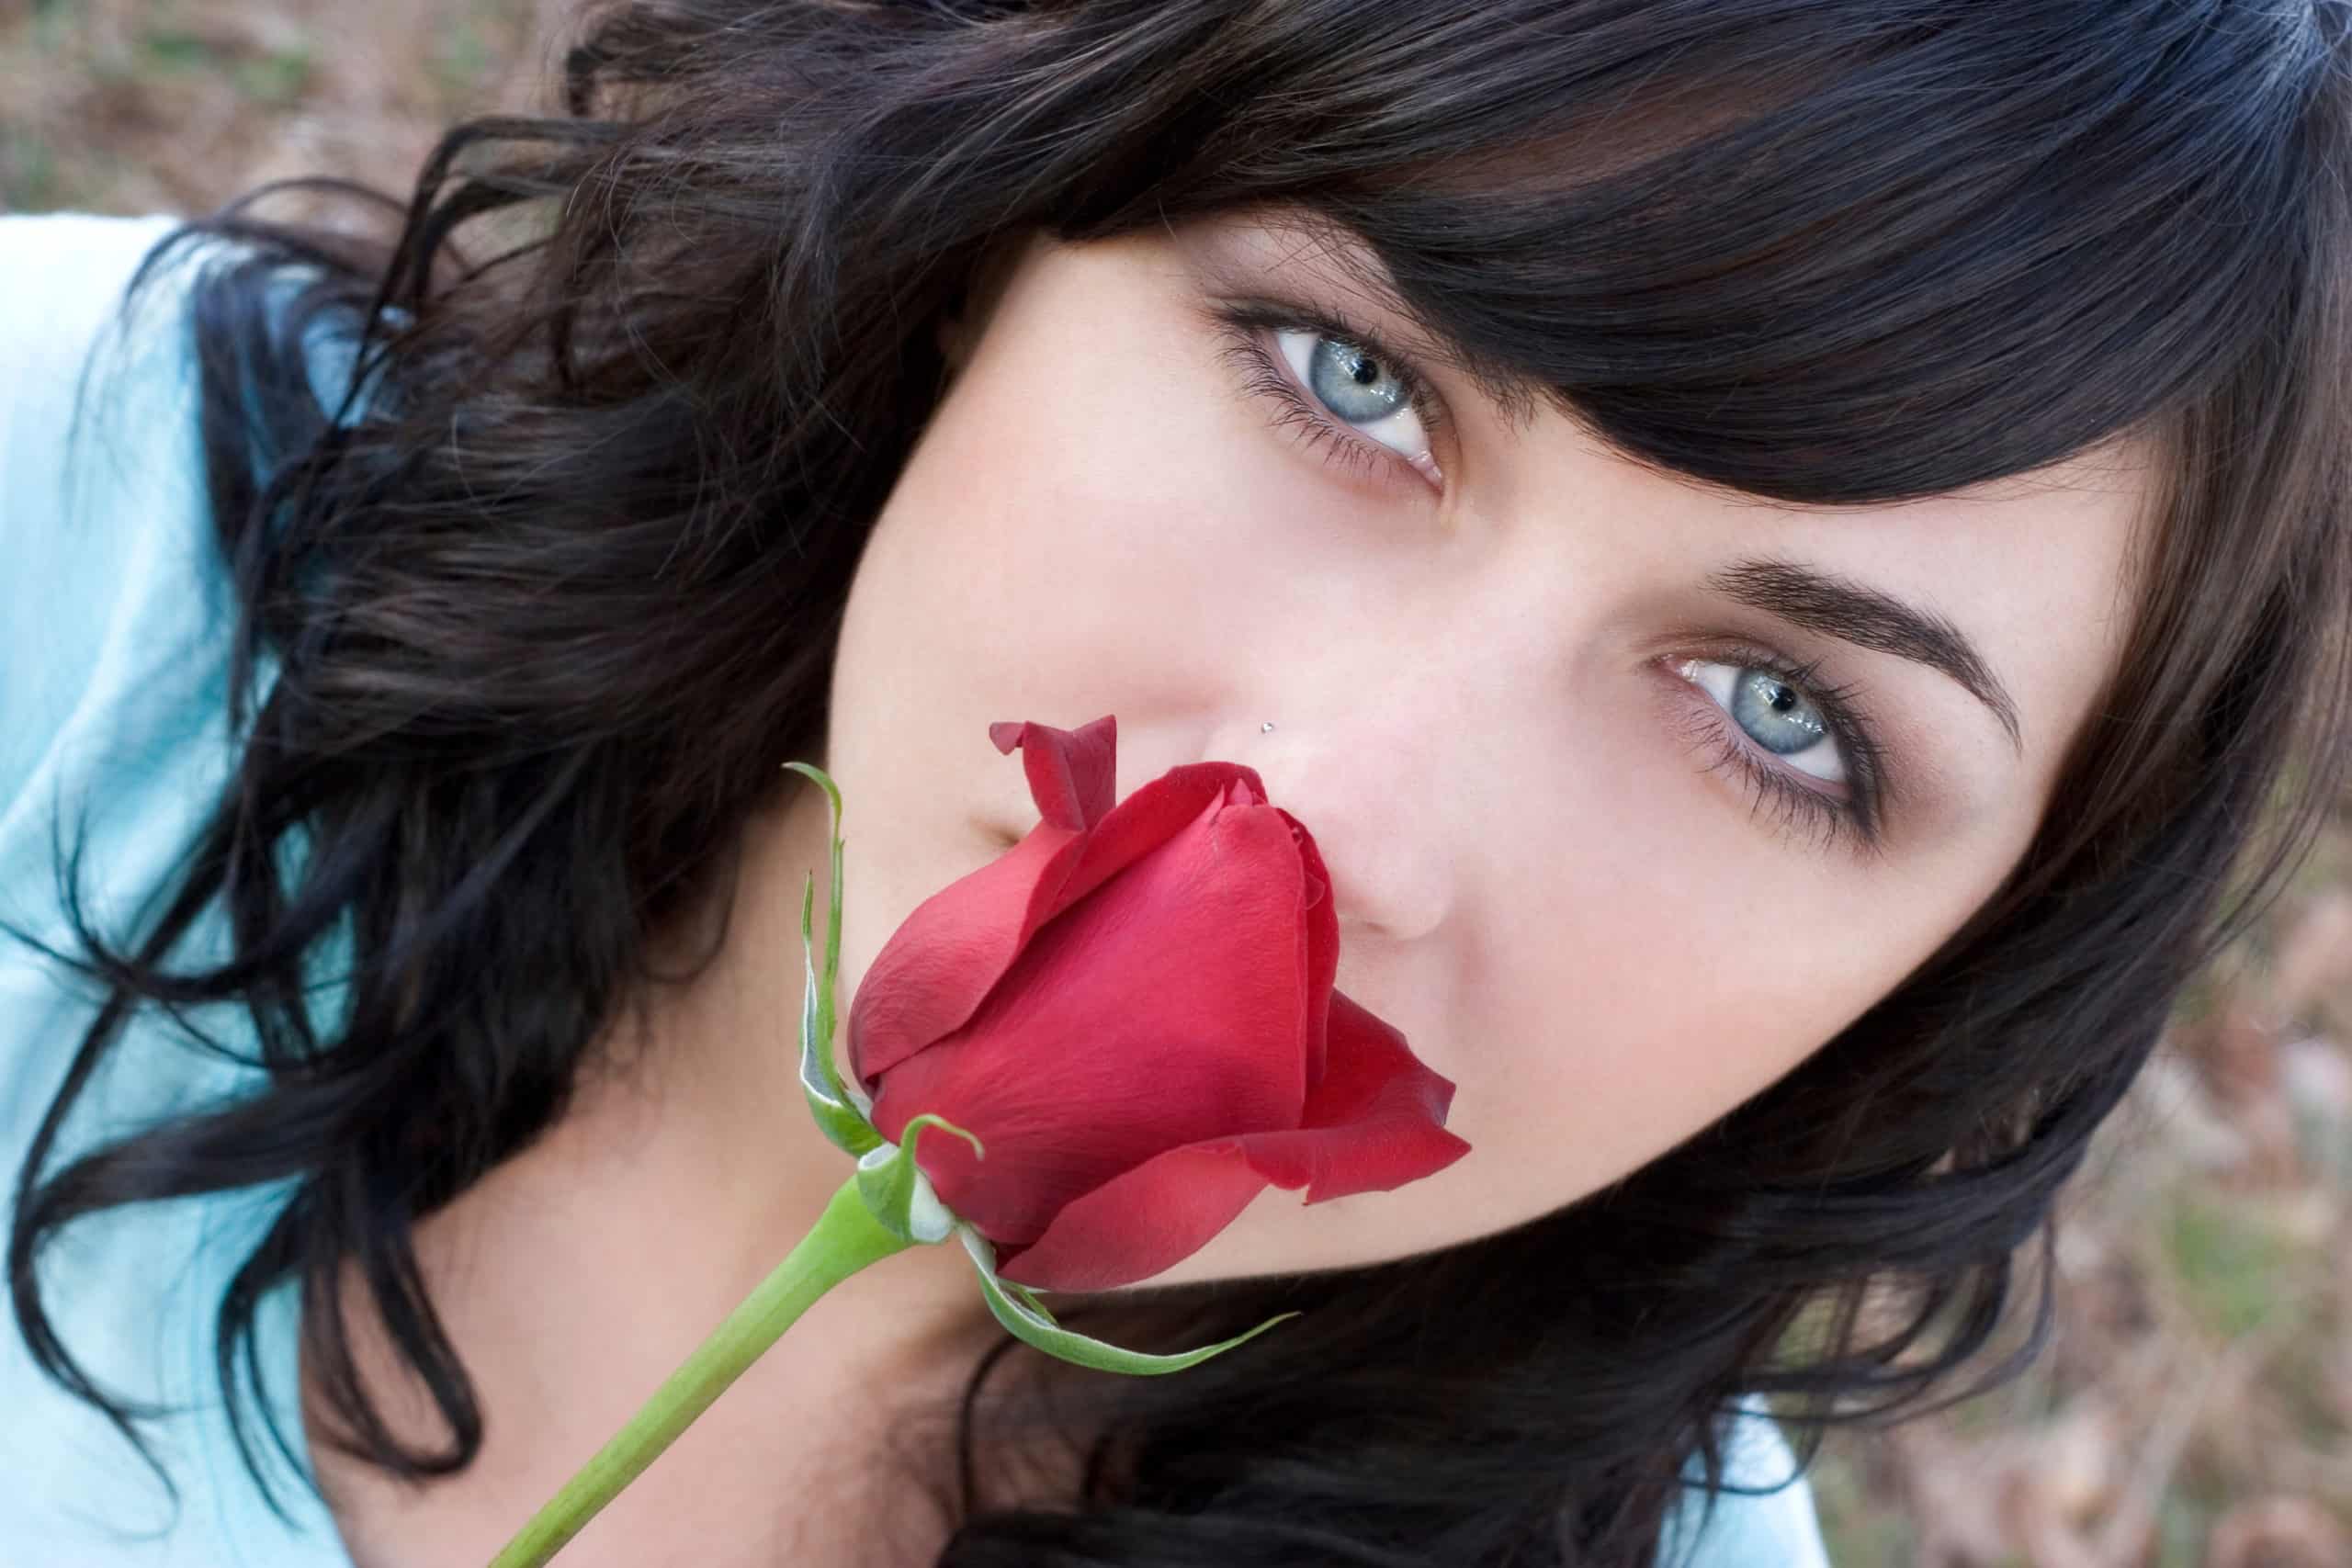 Woman with blue eyes smells rose.